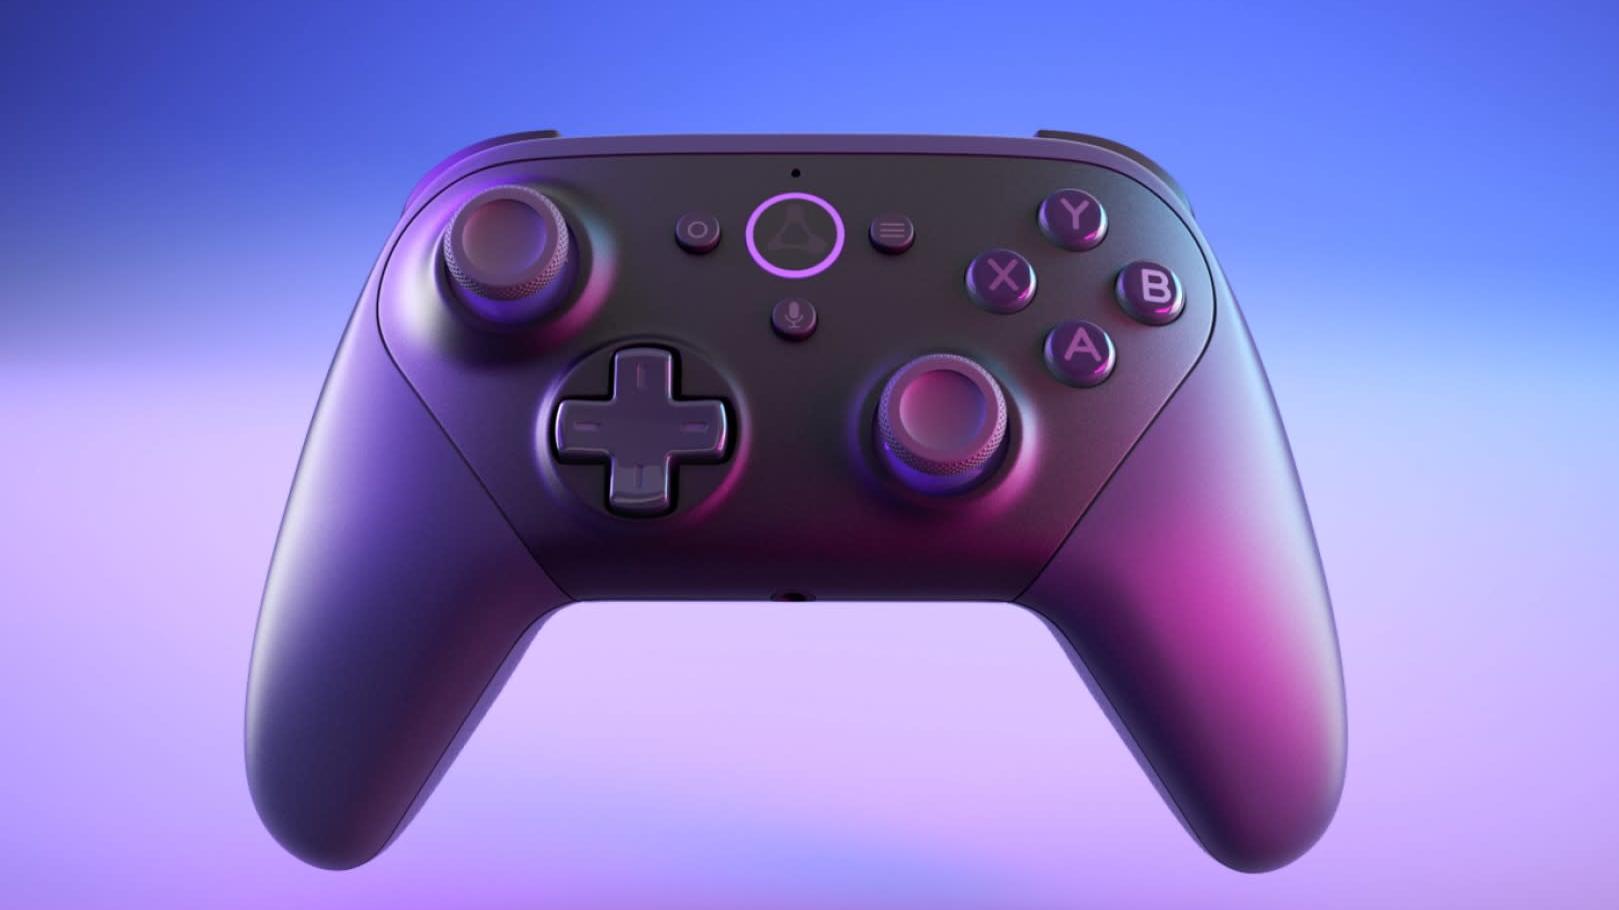 The Luna controller is, of course, Alexa-enabled. (Photo: Amazon)